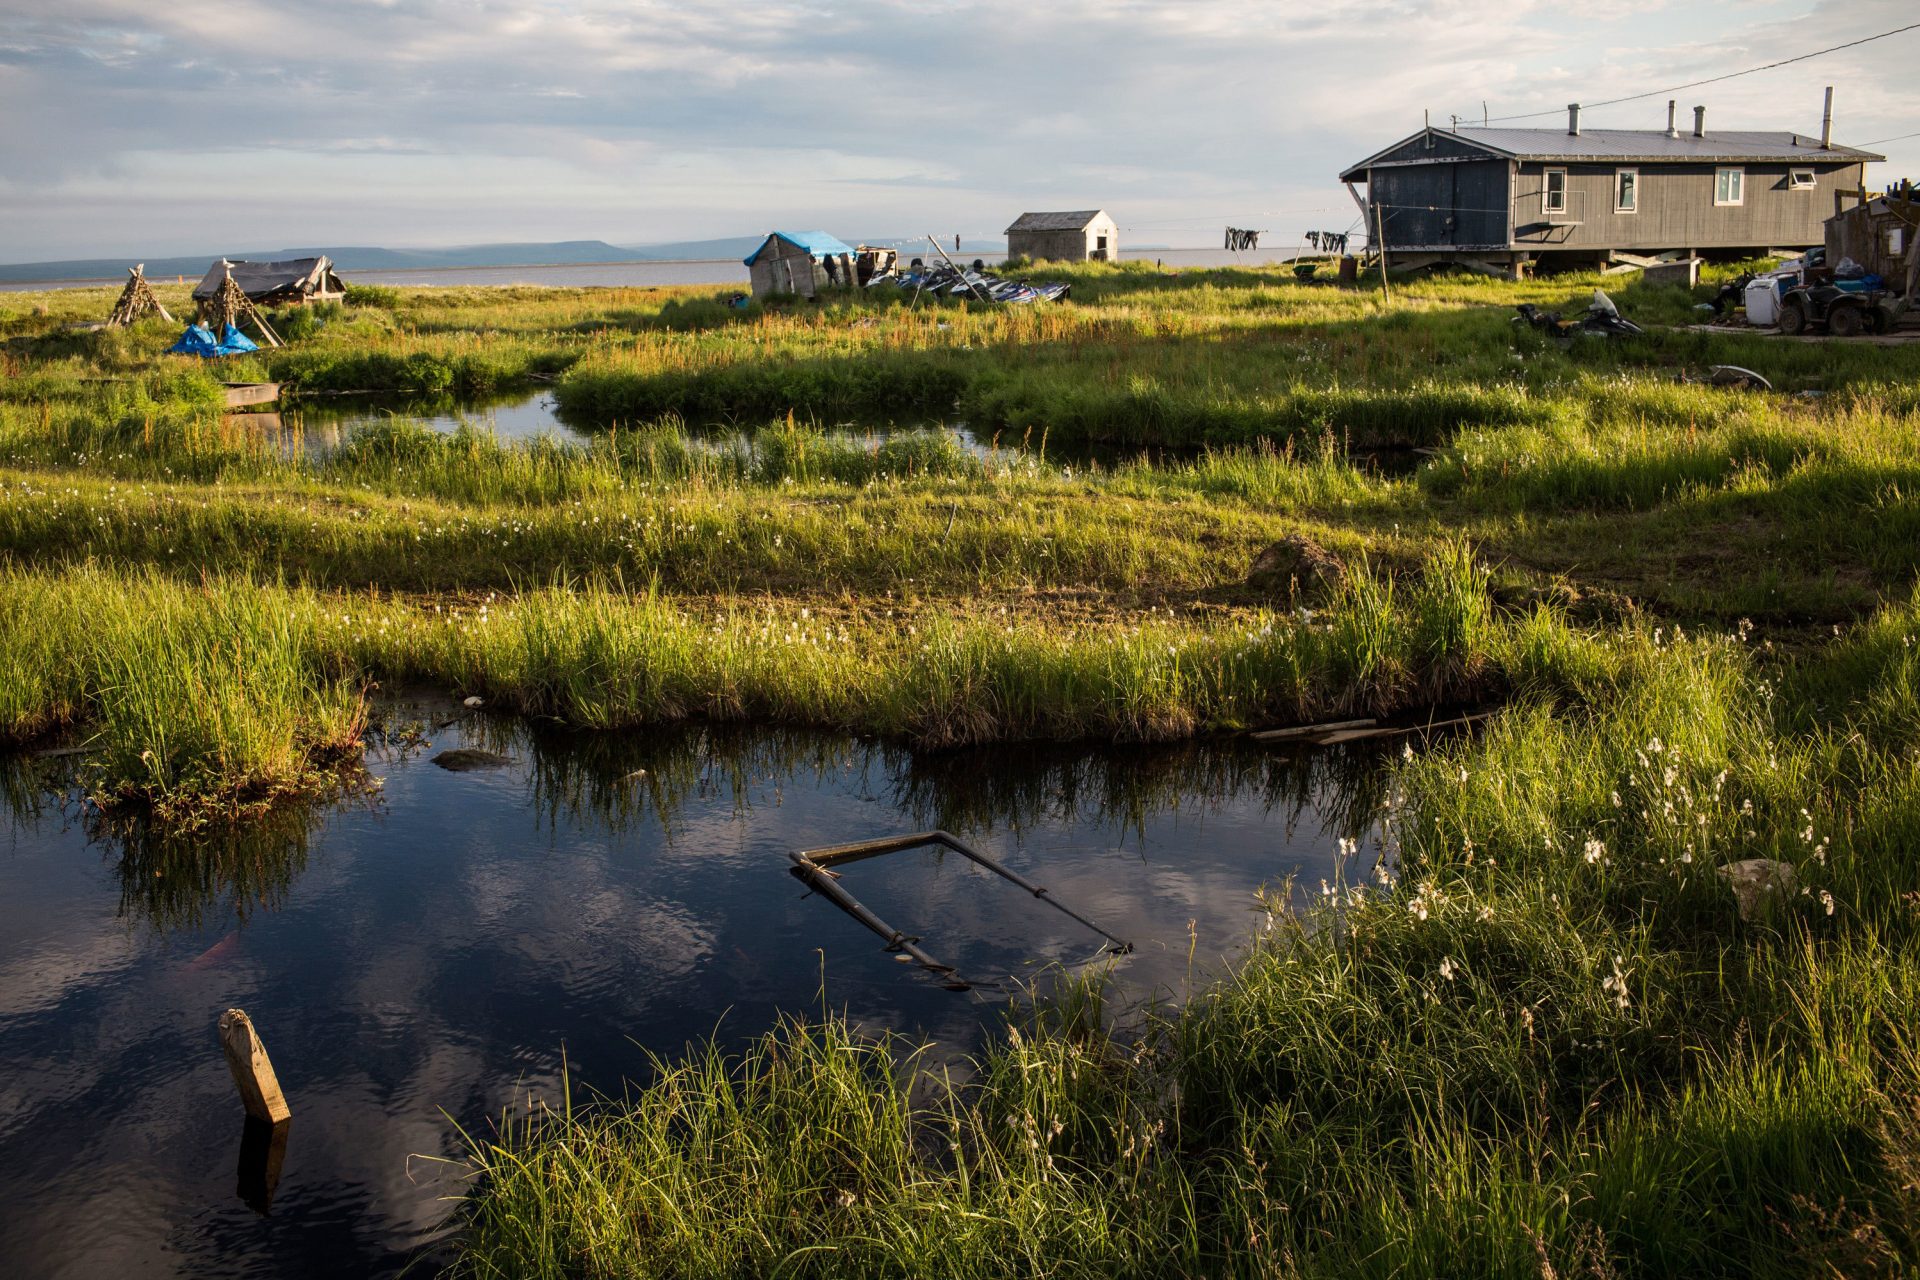 Rising temperatures in Alaska are melting permafrost, widening rivers and eroding homes in the remote village of Newtok, where about a third of residents relocated to higher ground last year.